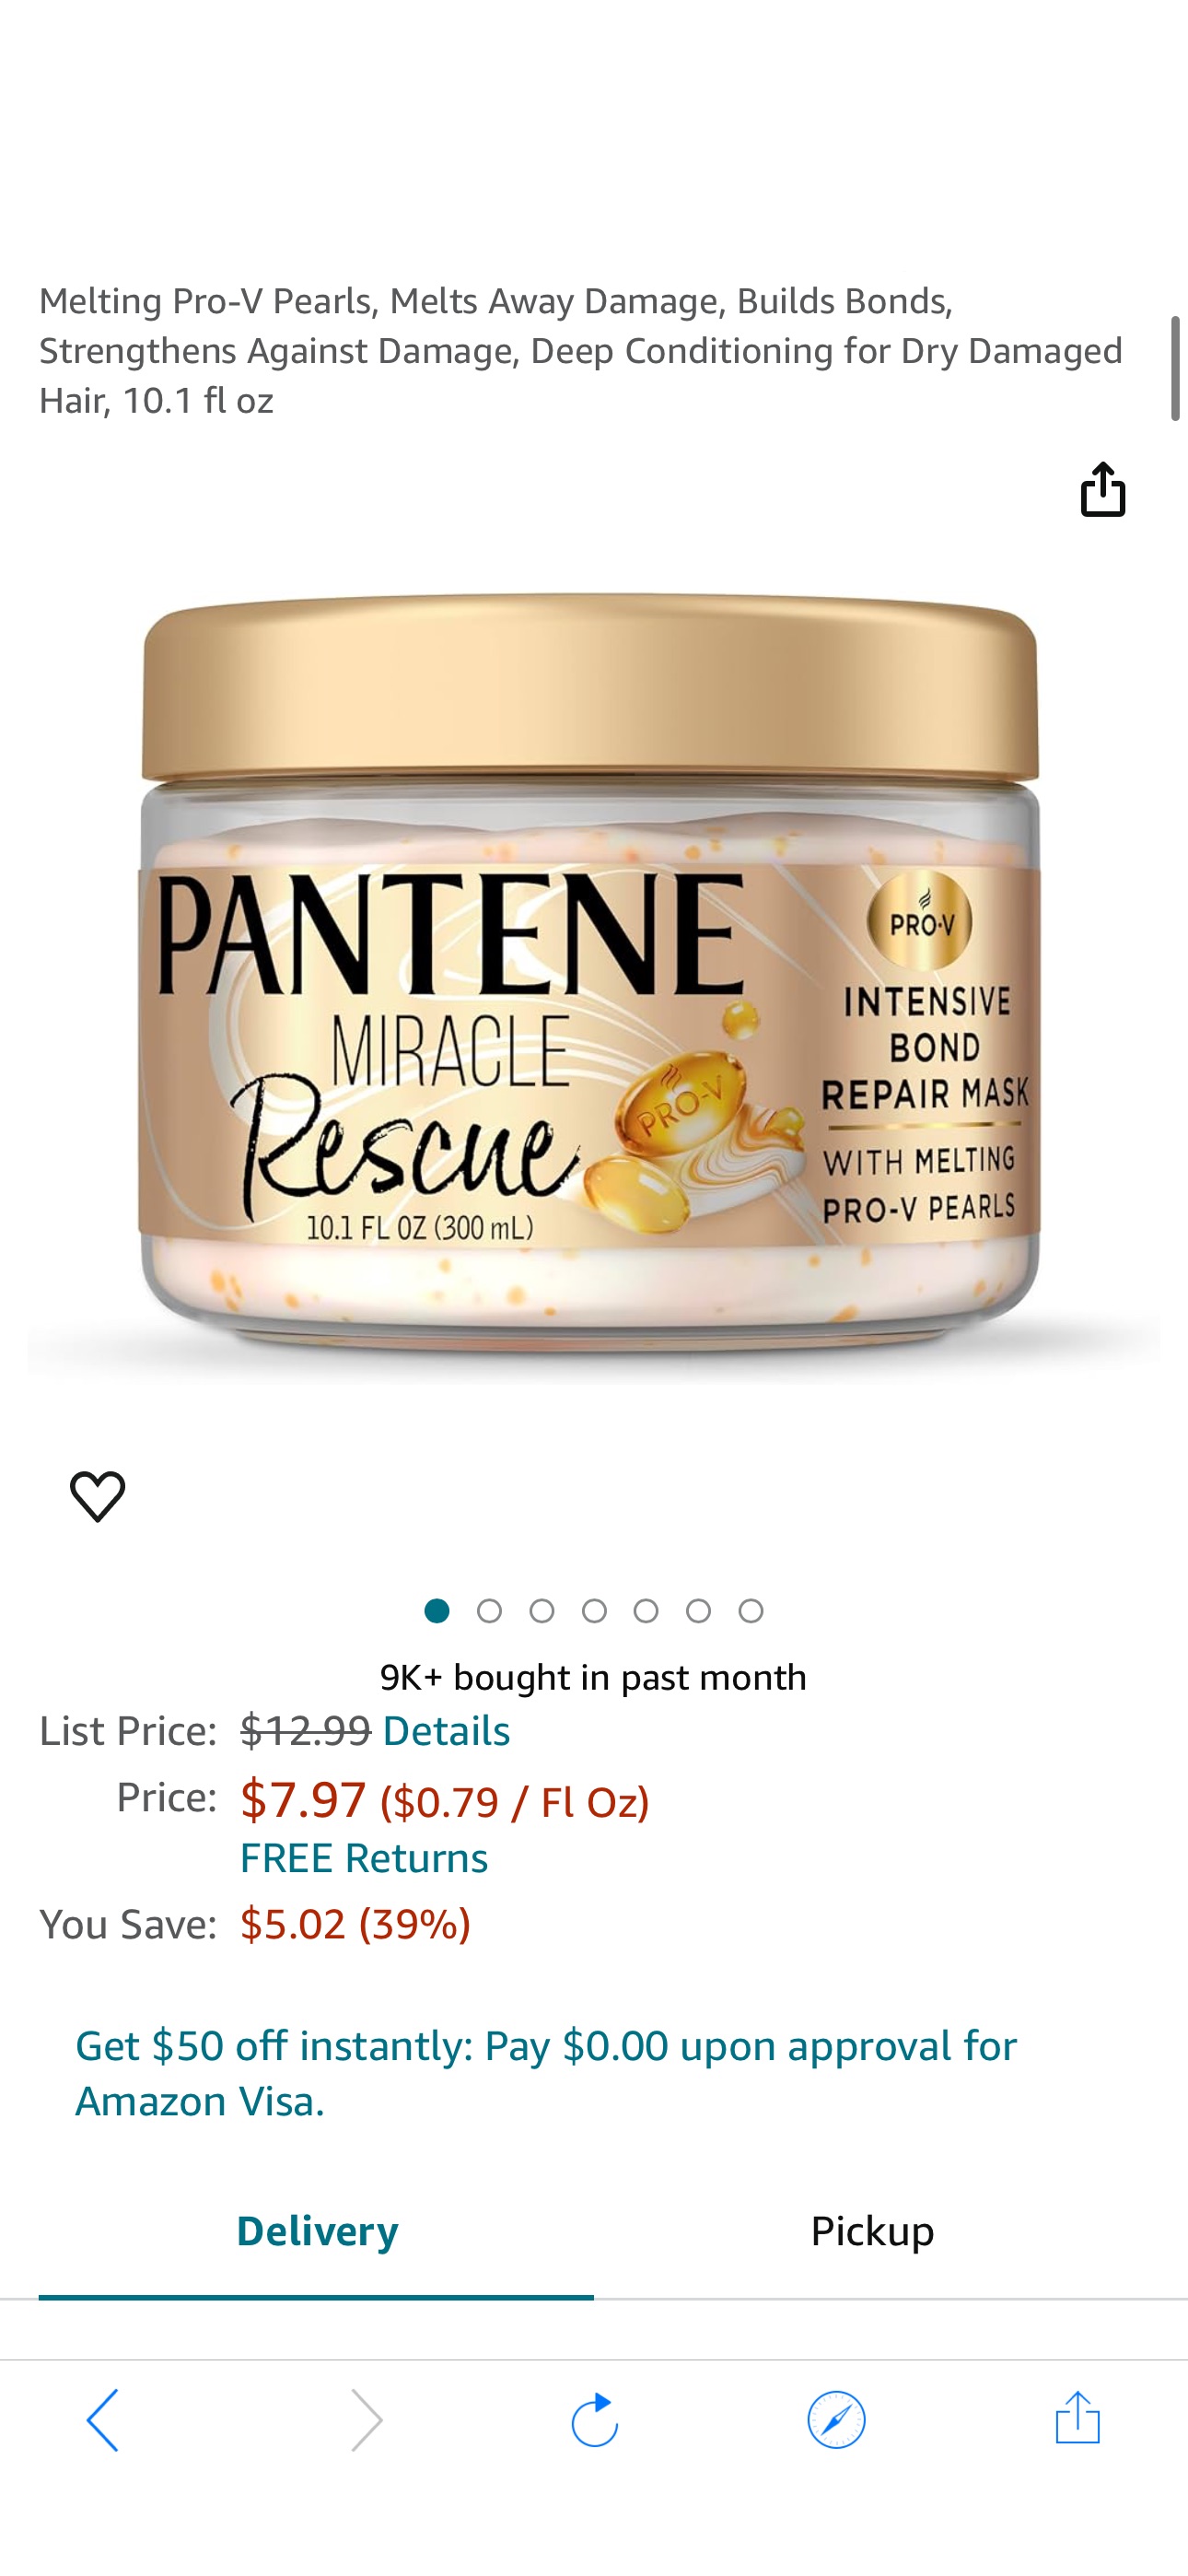 Amazon.com: Pantene Miracle Rescue Hair Mask, Intensive Bond Repair with Melting Pro-V Pearls, Melts Away Damage, Builds Bonds, Strengthens Against Damage, Deep Conditioning for Dry Damaged Hair, 10.1